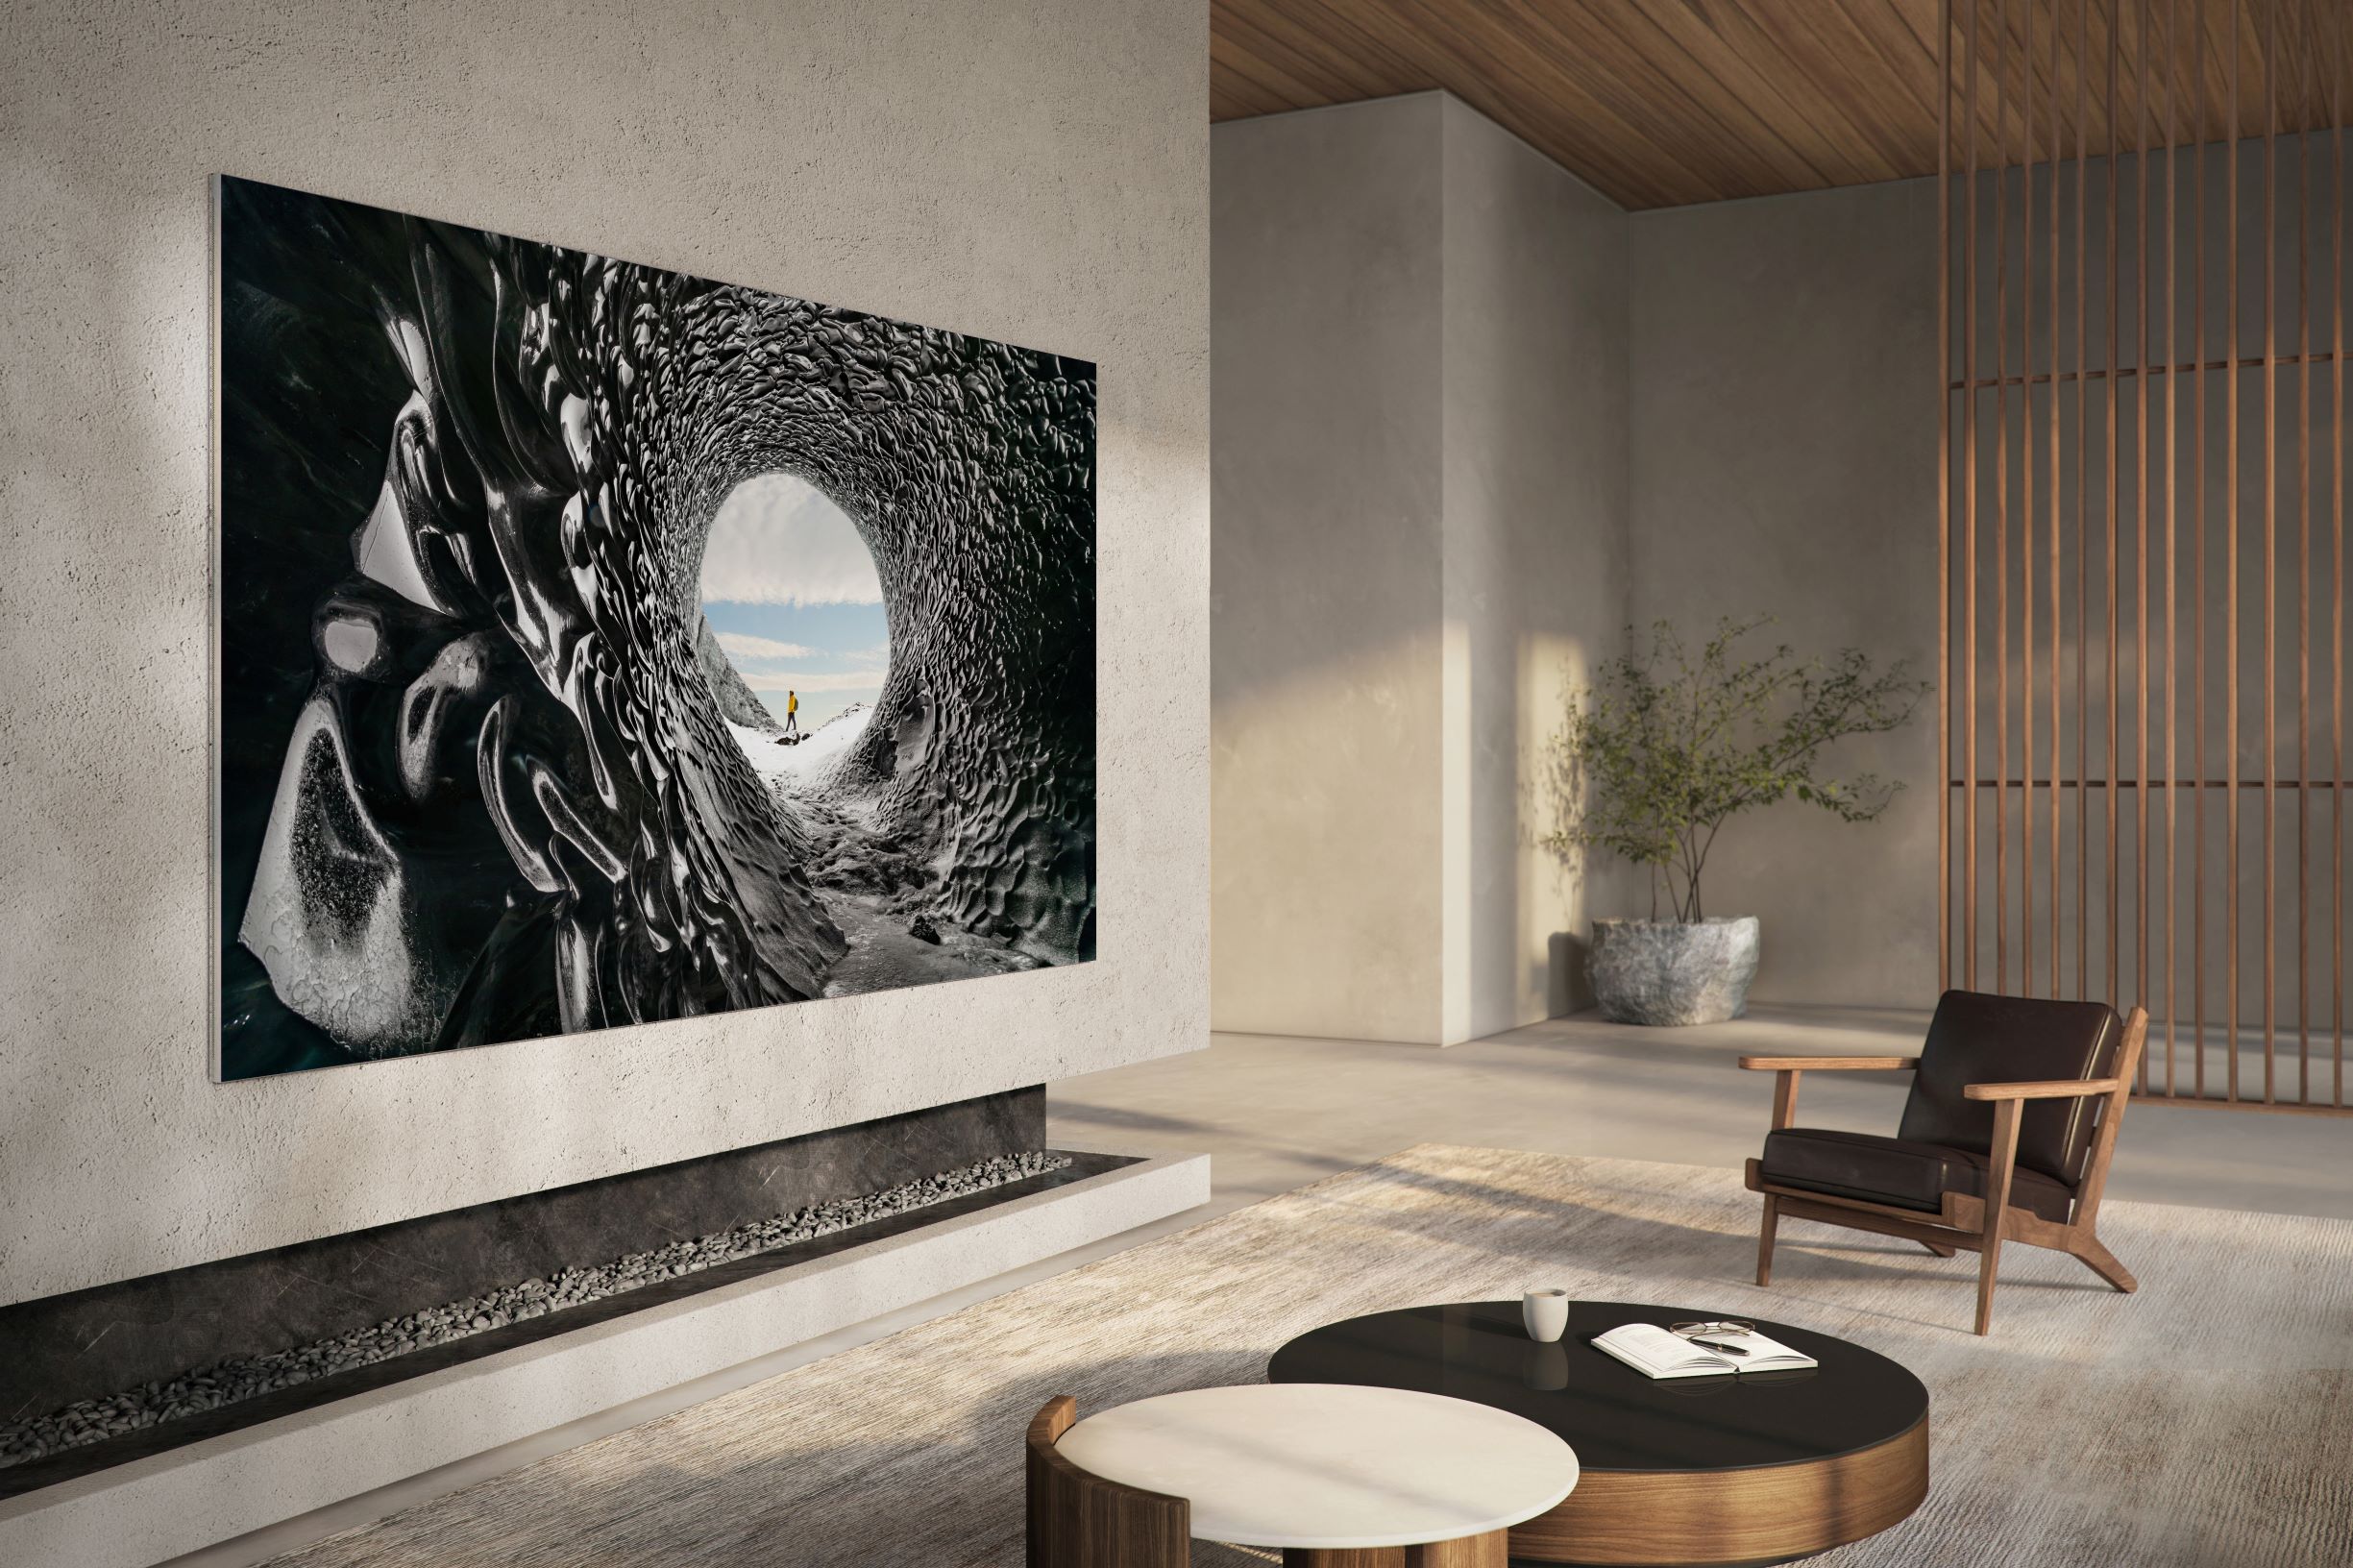 Samsung announces new TVs at CES 2021 including thinner The Frame